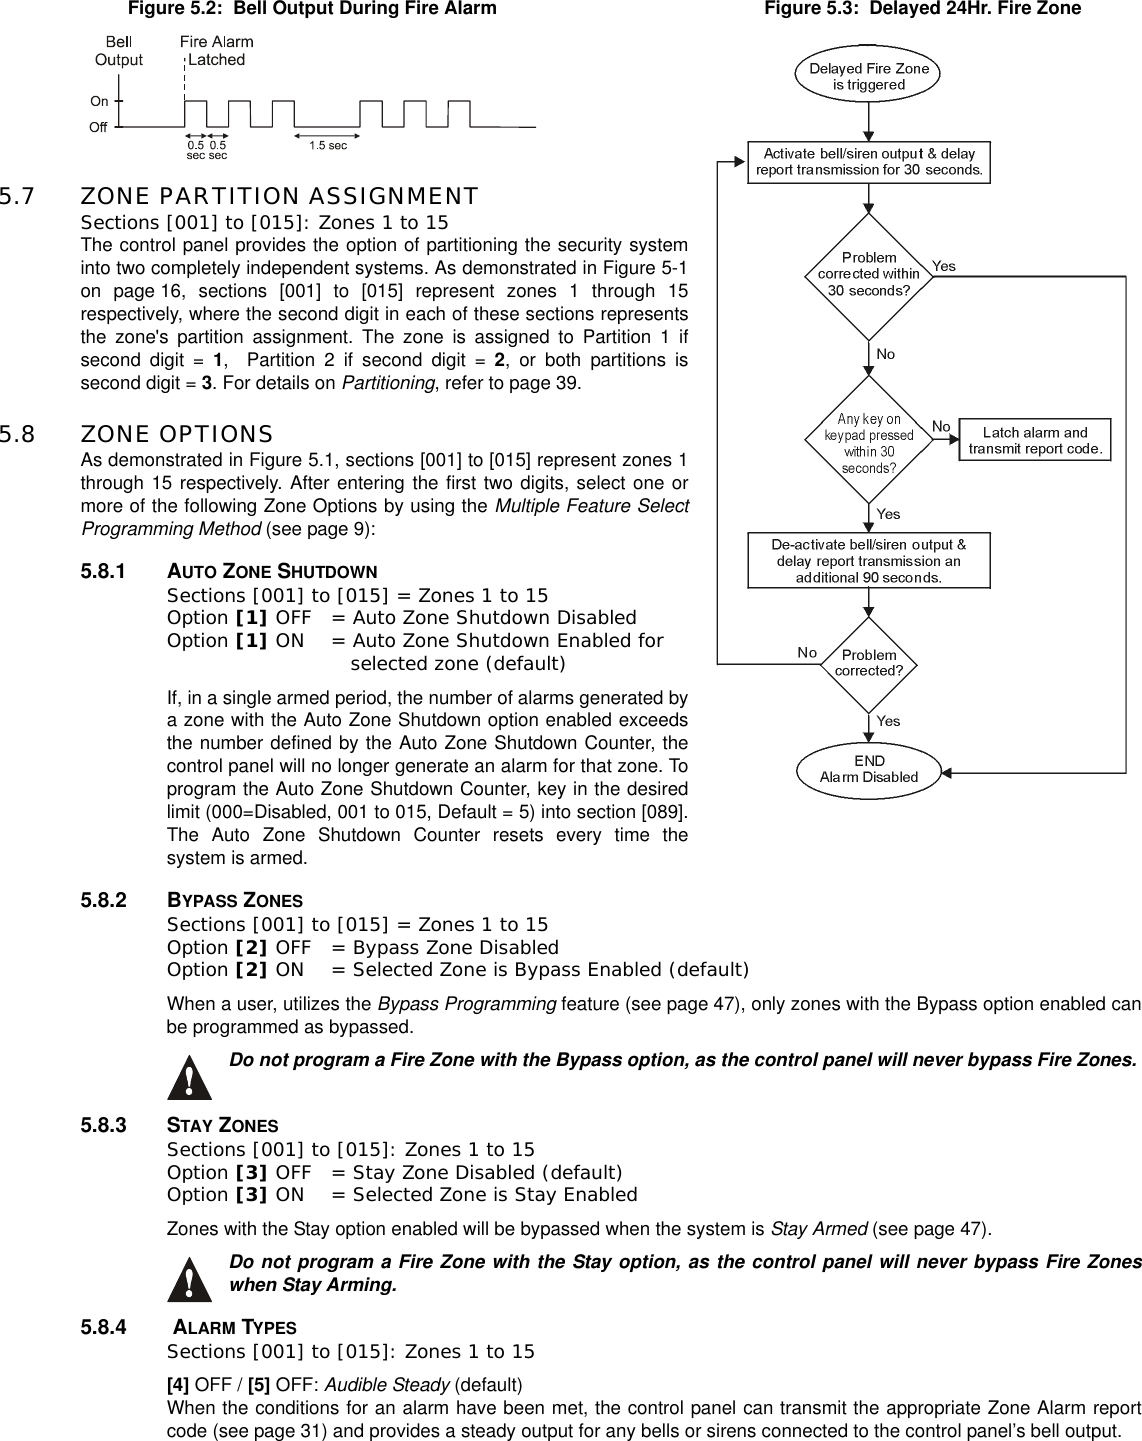 5.7 ZONE PARTITION ASSIGNMENTSections [001] to [015]: Zones 1 to 15The control panel provides the option of partitioning the security systeminto two completely independent systems. As demonstrated in Figure 5-1on page 16, sections [001] to [015] represent zones 1 through 15respectively, where the second digit in each of these sections representsthe zone&apos;s partition assignment. The zone is assigned to Partition 1 ifsecond digit = 1, Partition 2 if second digit = 2, or both partitions issecond digit = 3. For details on Partitioning, refer to page 39.5.8 ZONE OPTIONSAs demonstrated in Figure 5.1, sections [001] to [015] represent zones 1through 15 respectively. After entering the first two digits, select one ormore of the following Zone Options by using the Multiple Feature SelectProgramming Method (see page 9):5.8.1 AUTO ZONE SHUTDOWNSections [001] to [015] = Zones 1 to 15Option [1] OFF = Auto Zone Shutdown Disabled Option [1] ON = Auto Zone Shutdown Enabled for    selected zone (default)If, in a single armed period, the number of alarms generated bya zone with the Auto Zone Shutdown option enabled exceedsthe number defined by the Auto Zone Shutdown Counter, thecontrol panel will no longer generate an alarm for that zone. Toprogram the Auto Zone Shutdown Counter, key in the desiredlimit (000=Disabled, 001 to 015, Default = 5) into section [089].The Auto Zone Shutdown Counter resets every time thesystem is armed.5.8.2 BYPASS ZONESSections [001] to [015] = Zones 1 to 15Option [2] OFF = Bypass Zone Disabled Option [2] ON = Selected Zone is Bypass Enabled (default)When a user, utilizes the Bypass Programming feature (see page 47), only zones with the Bypass option enabled canbe programmed as bypassed.Do not program a Fire Zone with the Bypass option, as the control panel will never bypass Fire Zones.5.8.3 STAY ZONESSections [001] to [015]: Zones 1 to 15Option [3] OFF = Stay Zone Disabled (default)Option [3] ON = Selected Zone is Stay EnabledZones with the Stay option enabled will be bypassed when the system is Stay Armed (see page 47).Do not program a Fire Zone with the Stay option, as the control panel will never bypass Fire Zoneswhen Stay Arming.5.8.4 ALARM TYPESSections [001] to [015]: Zones 1 to 15[4] OFF / [5] OFF: Audible Steady (default)When the conditions for an alarm have been met, the control panel can transmit the appropriate Zone Alarm reportcode (see page 31) and provides a steady output for any bells or sirens connected to the control panel’s bell output.Figure 5.2: Bell Output During Fire Alarm Figure 5.3: Delayed 24Hr. Fire Zone